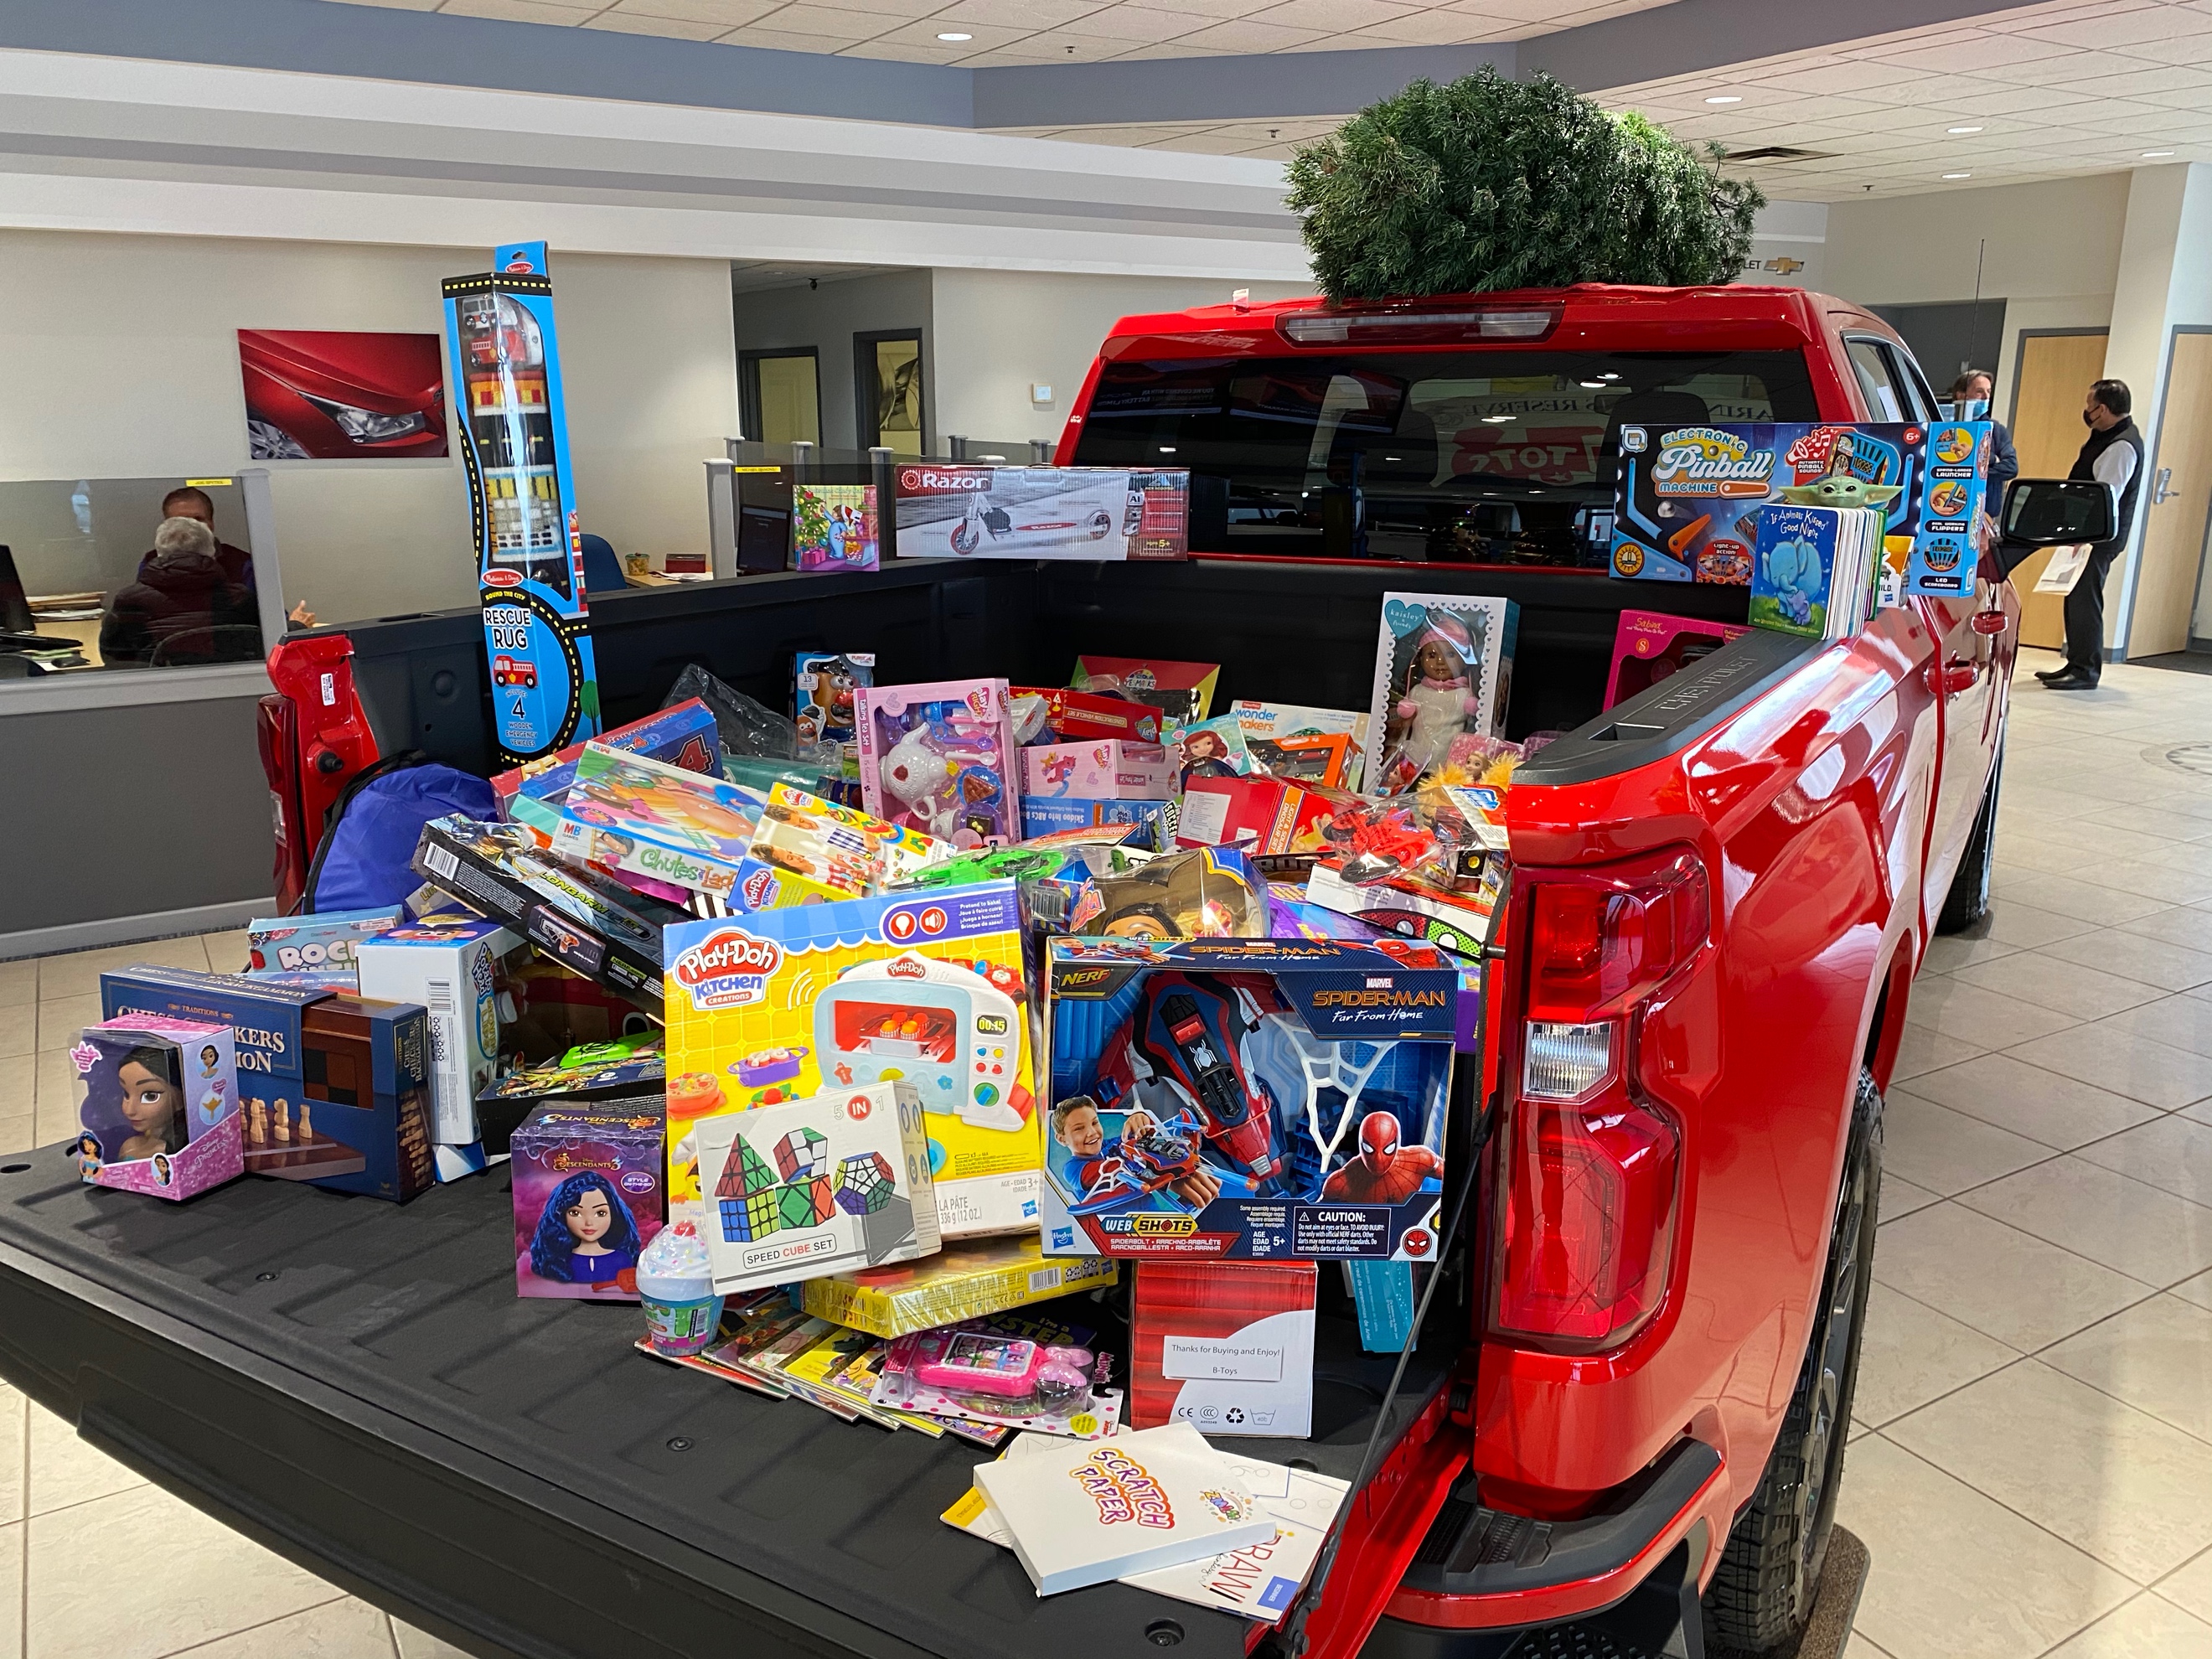 Apple Chevy Toys for Toys Toy Drive Recap